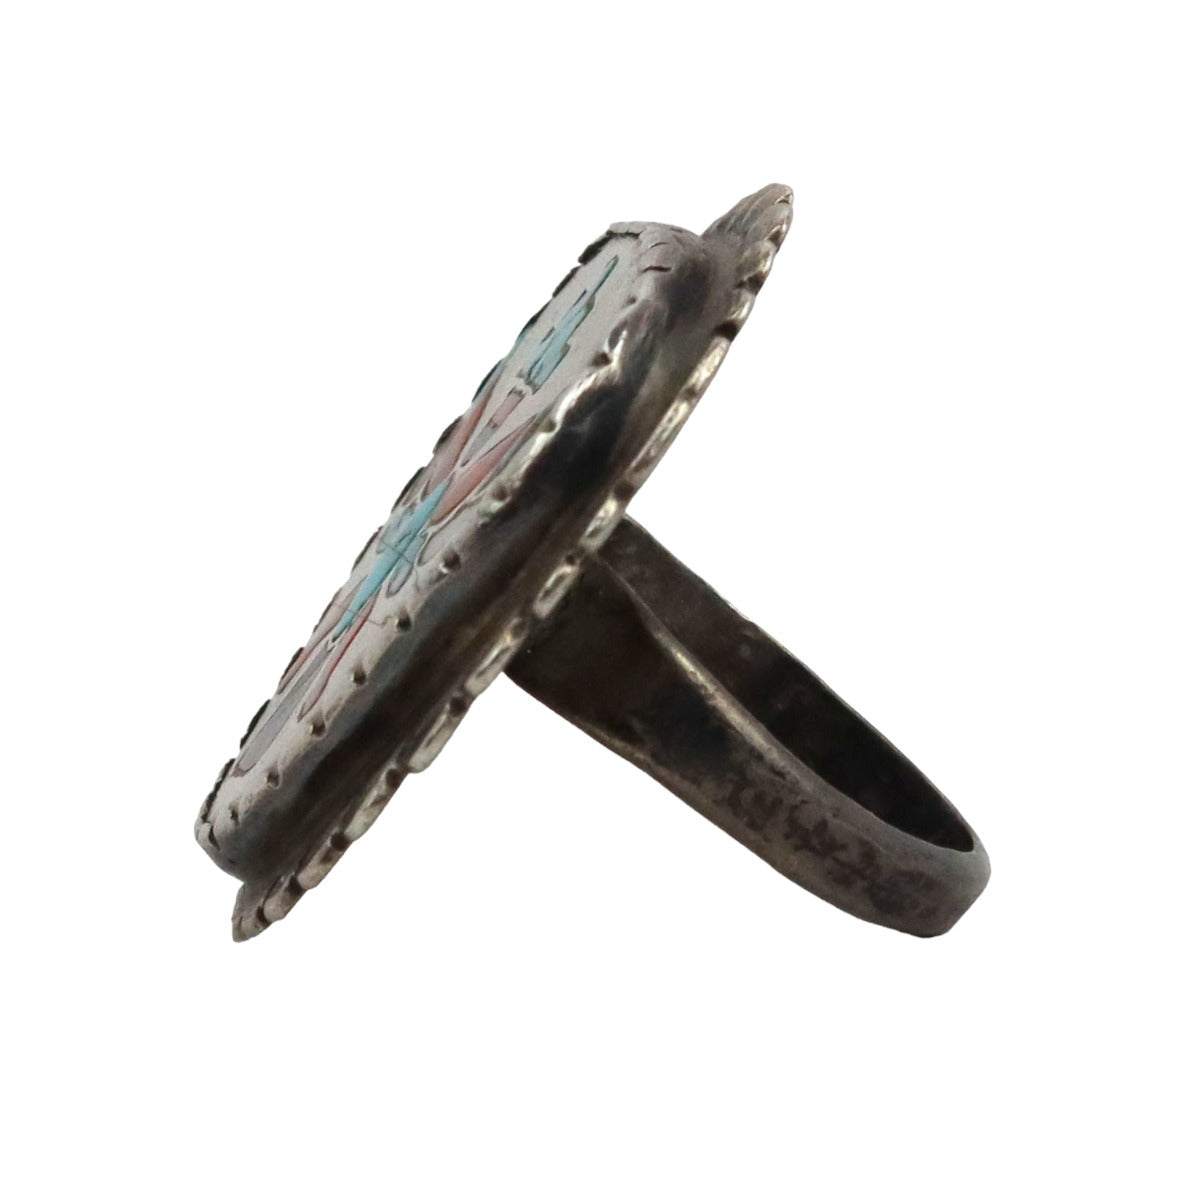 Zuni Multi-Stone Inlay and Silver Ring with Knifewing God Design c. 1950s, size 7.75 (J15076-CO-014) 3